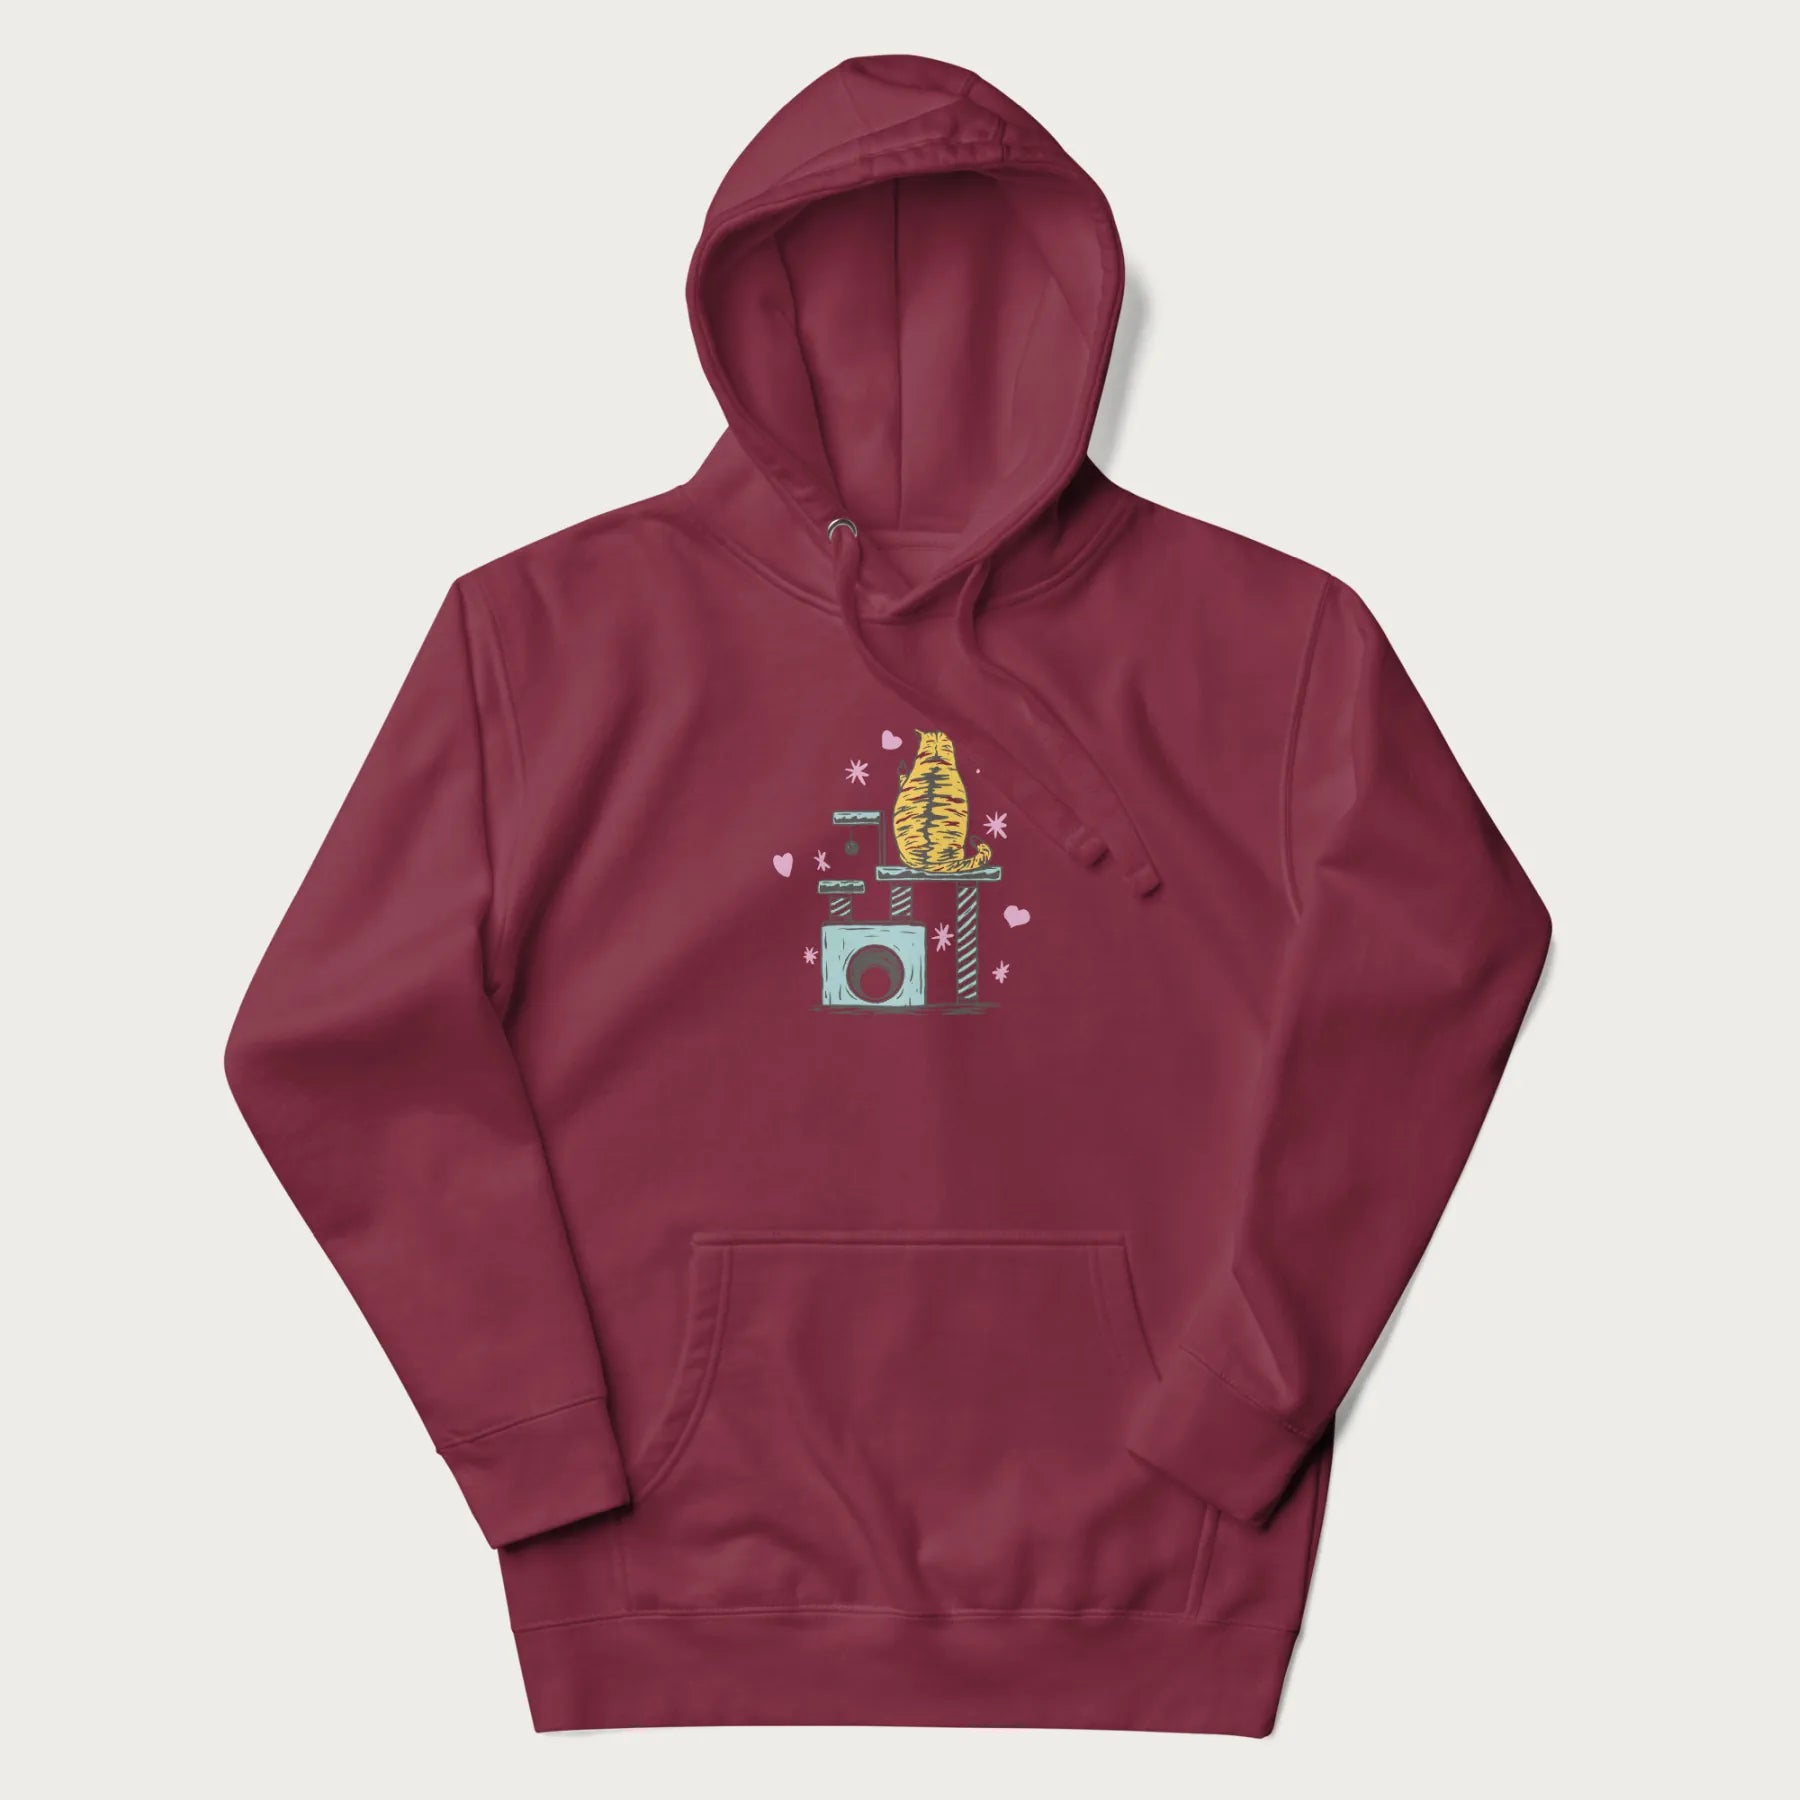 Maroon hoodie with graphic of a tabby cat on a scratching post, raising its middle finger.